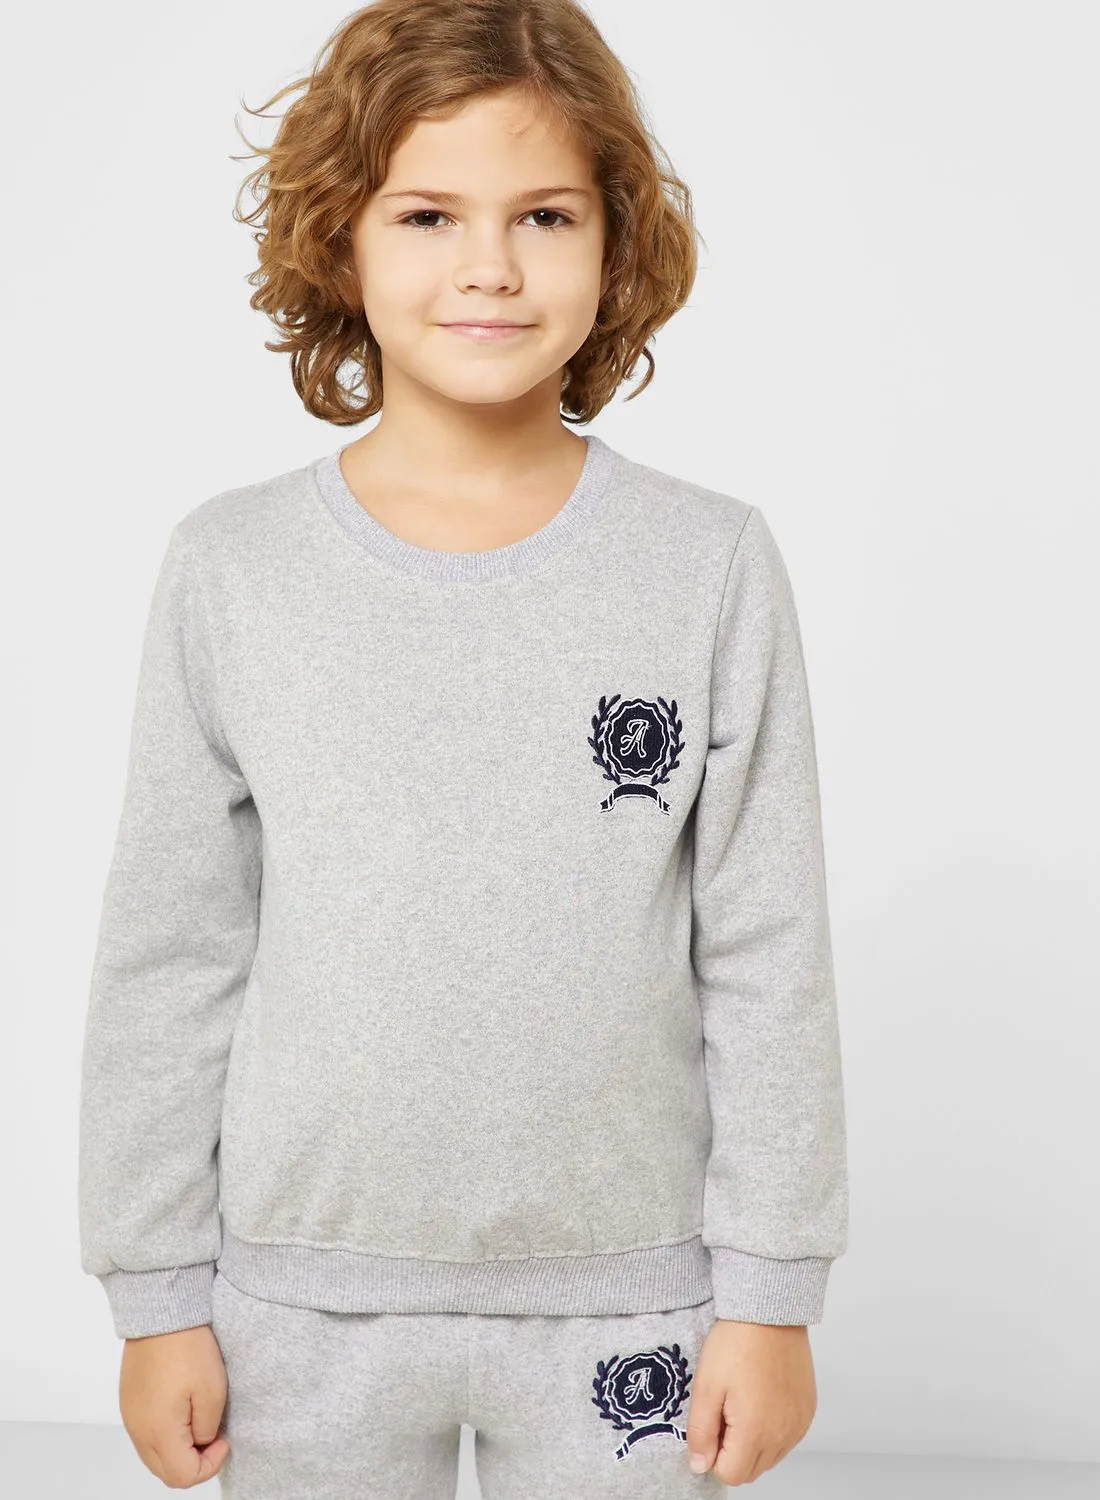 Pinata Embroidered Detail Sweatshirt For Boys